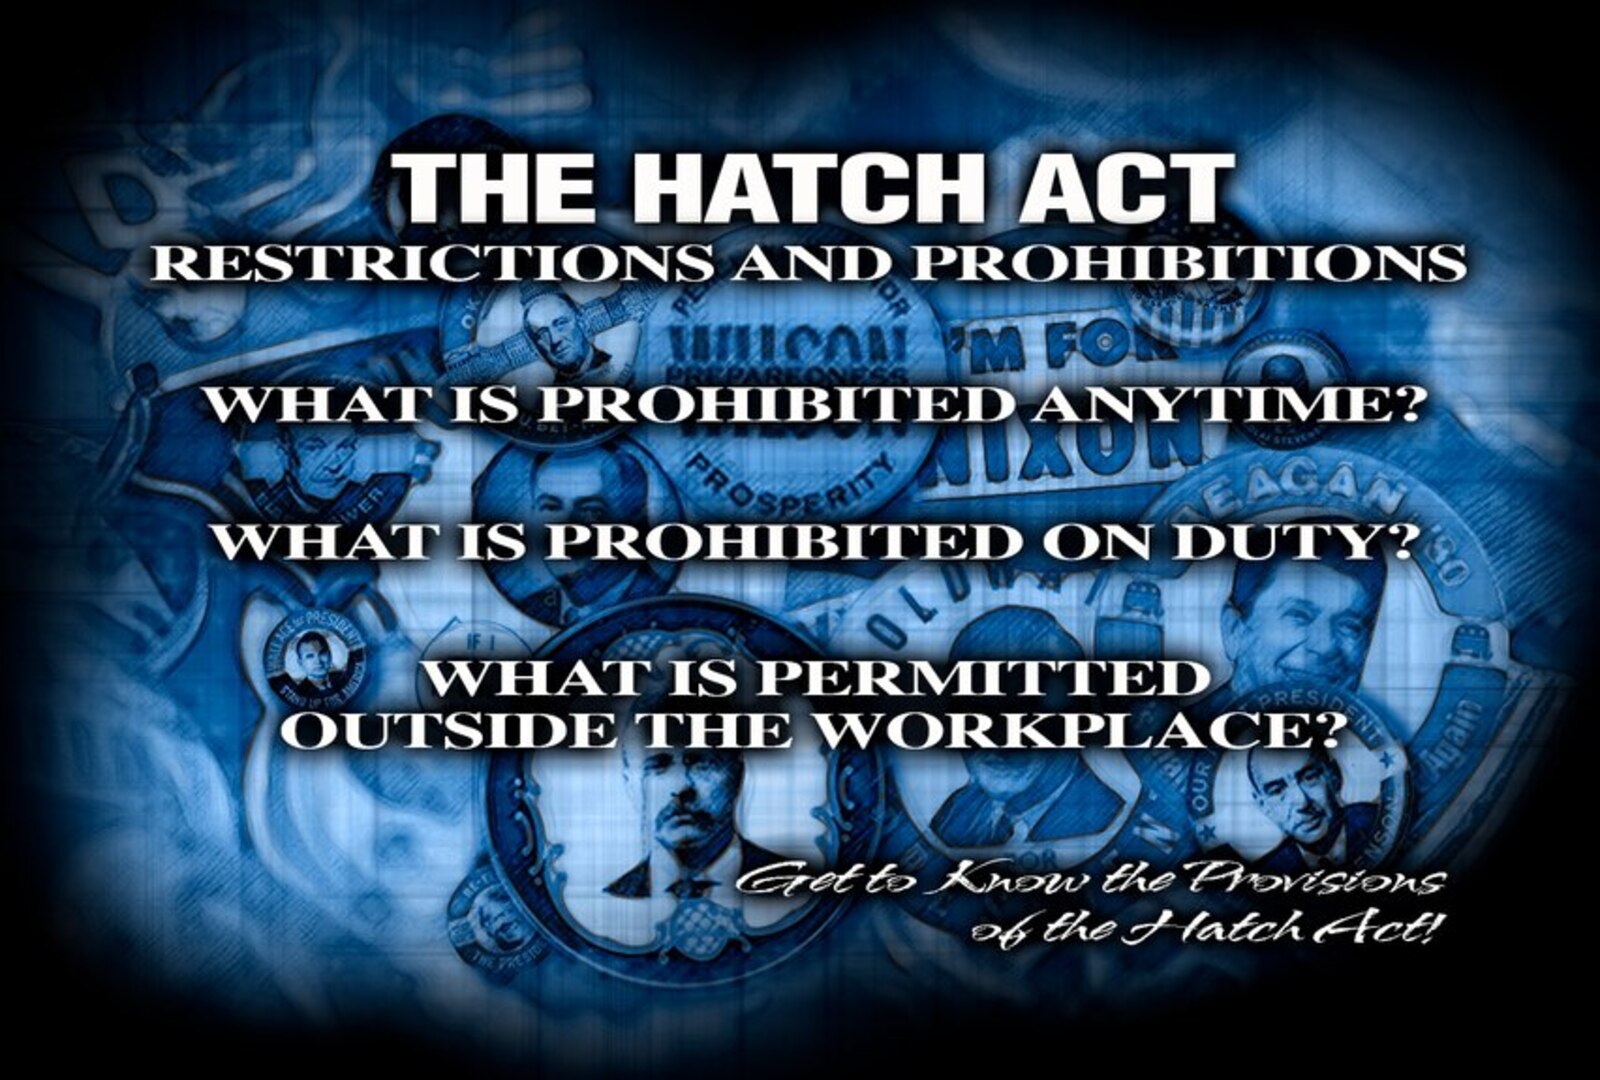 The Hatch Act's purpose is to ensure federal programs are administered in a nonpartisan fashion, to protect federal employees from political coercion in the workplace, and to ensure federal employees are advanced based on merit and not based on political affiliation.